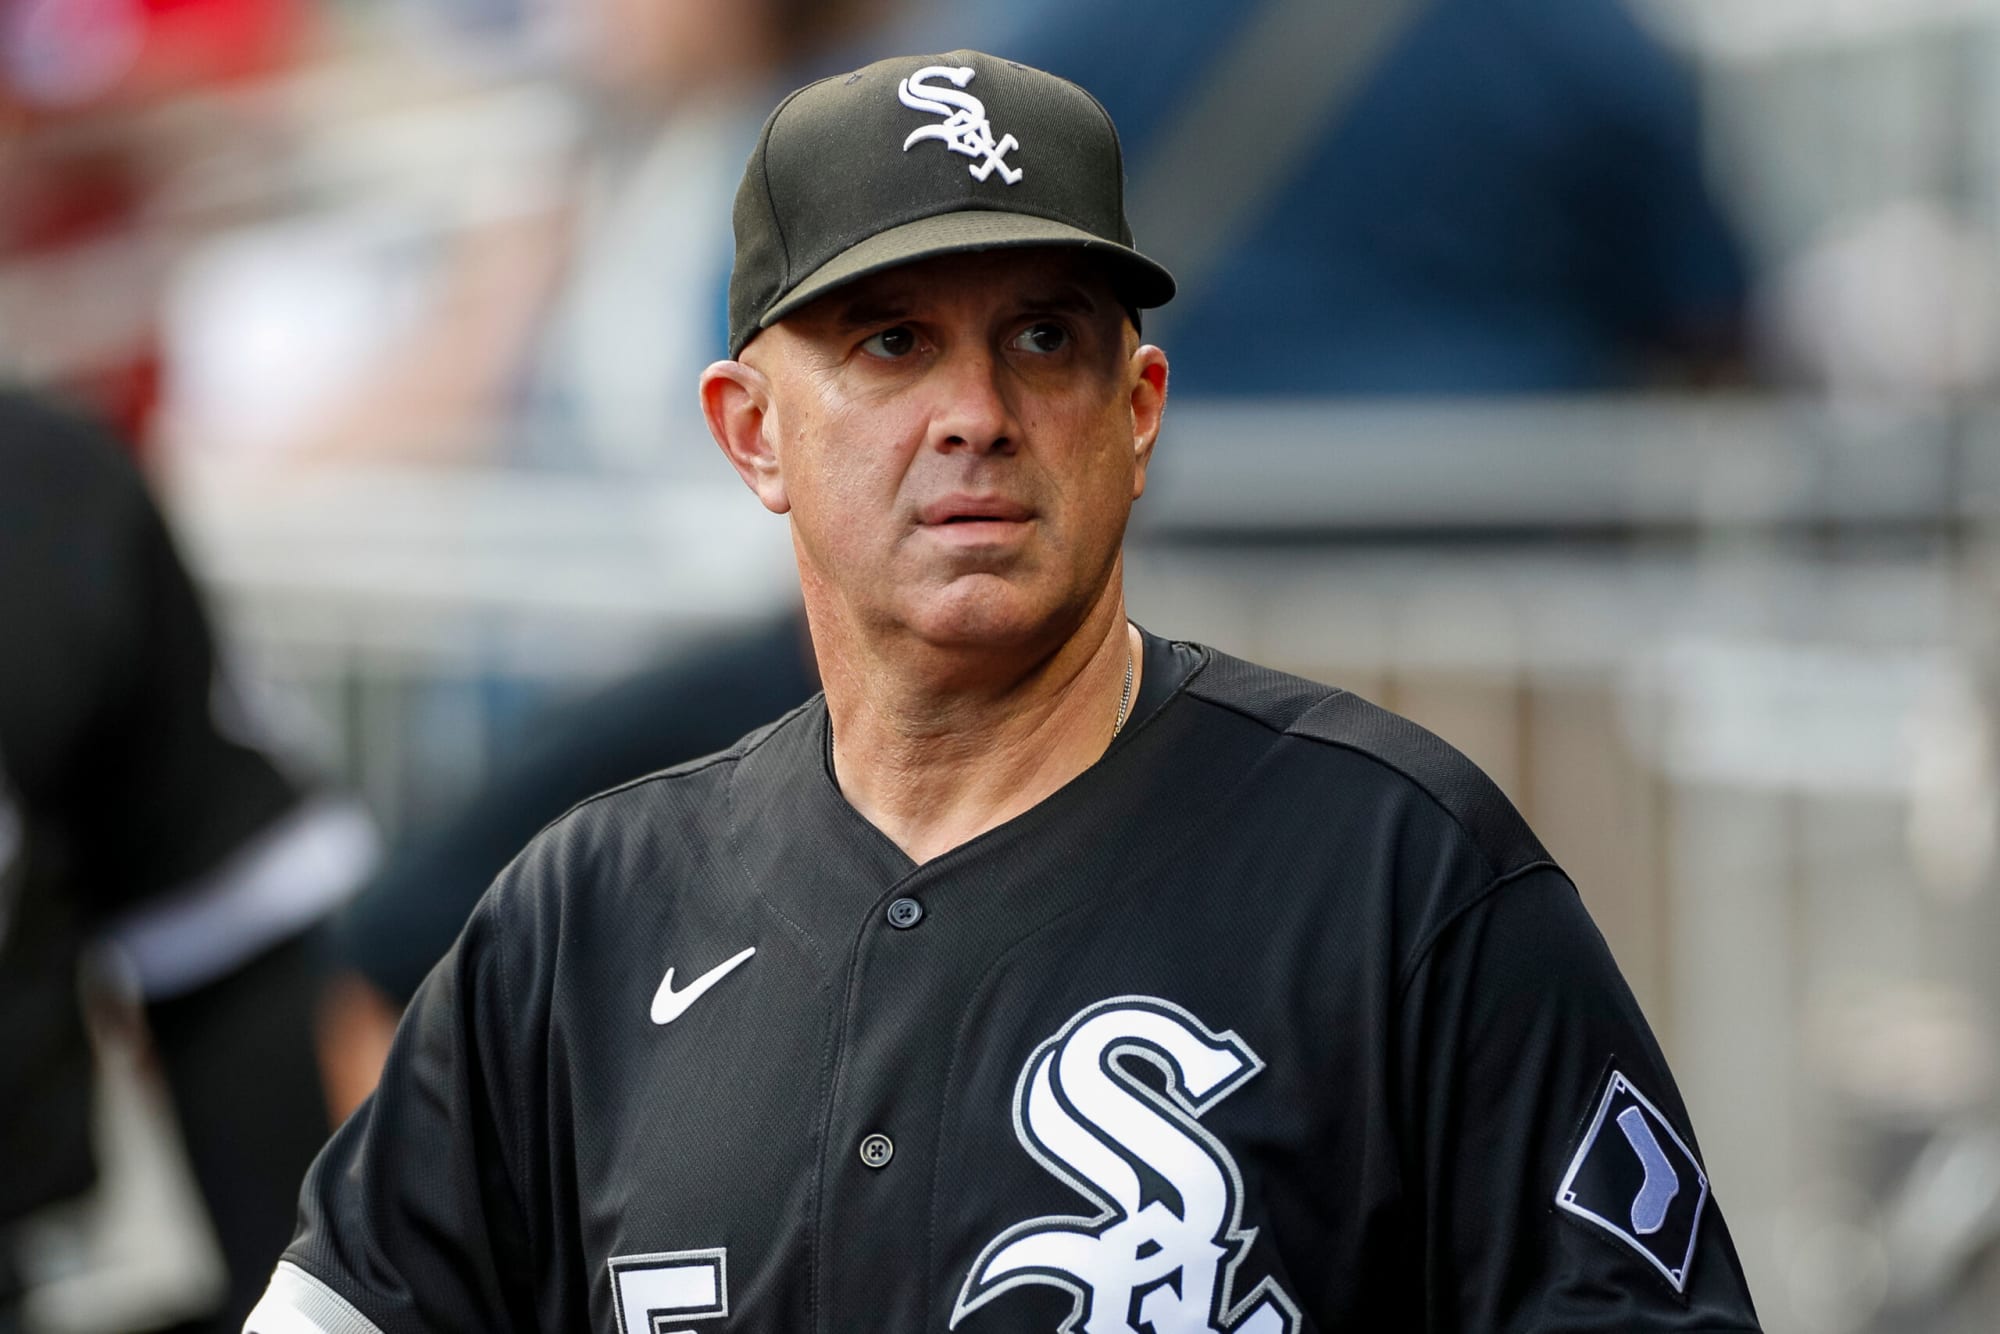 CHGO's FULL Exclusive Interview w/ Chicago White Sox Manager Pedro Grifol  on Disastrous 2023 